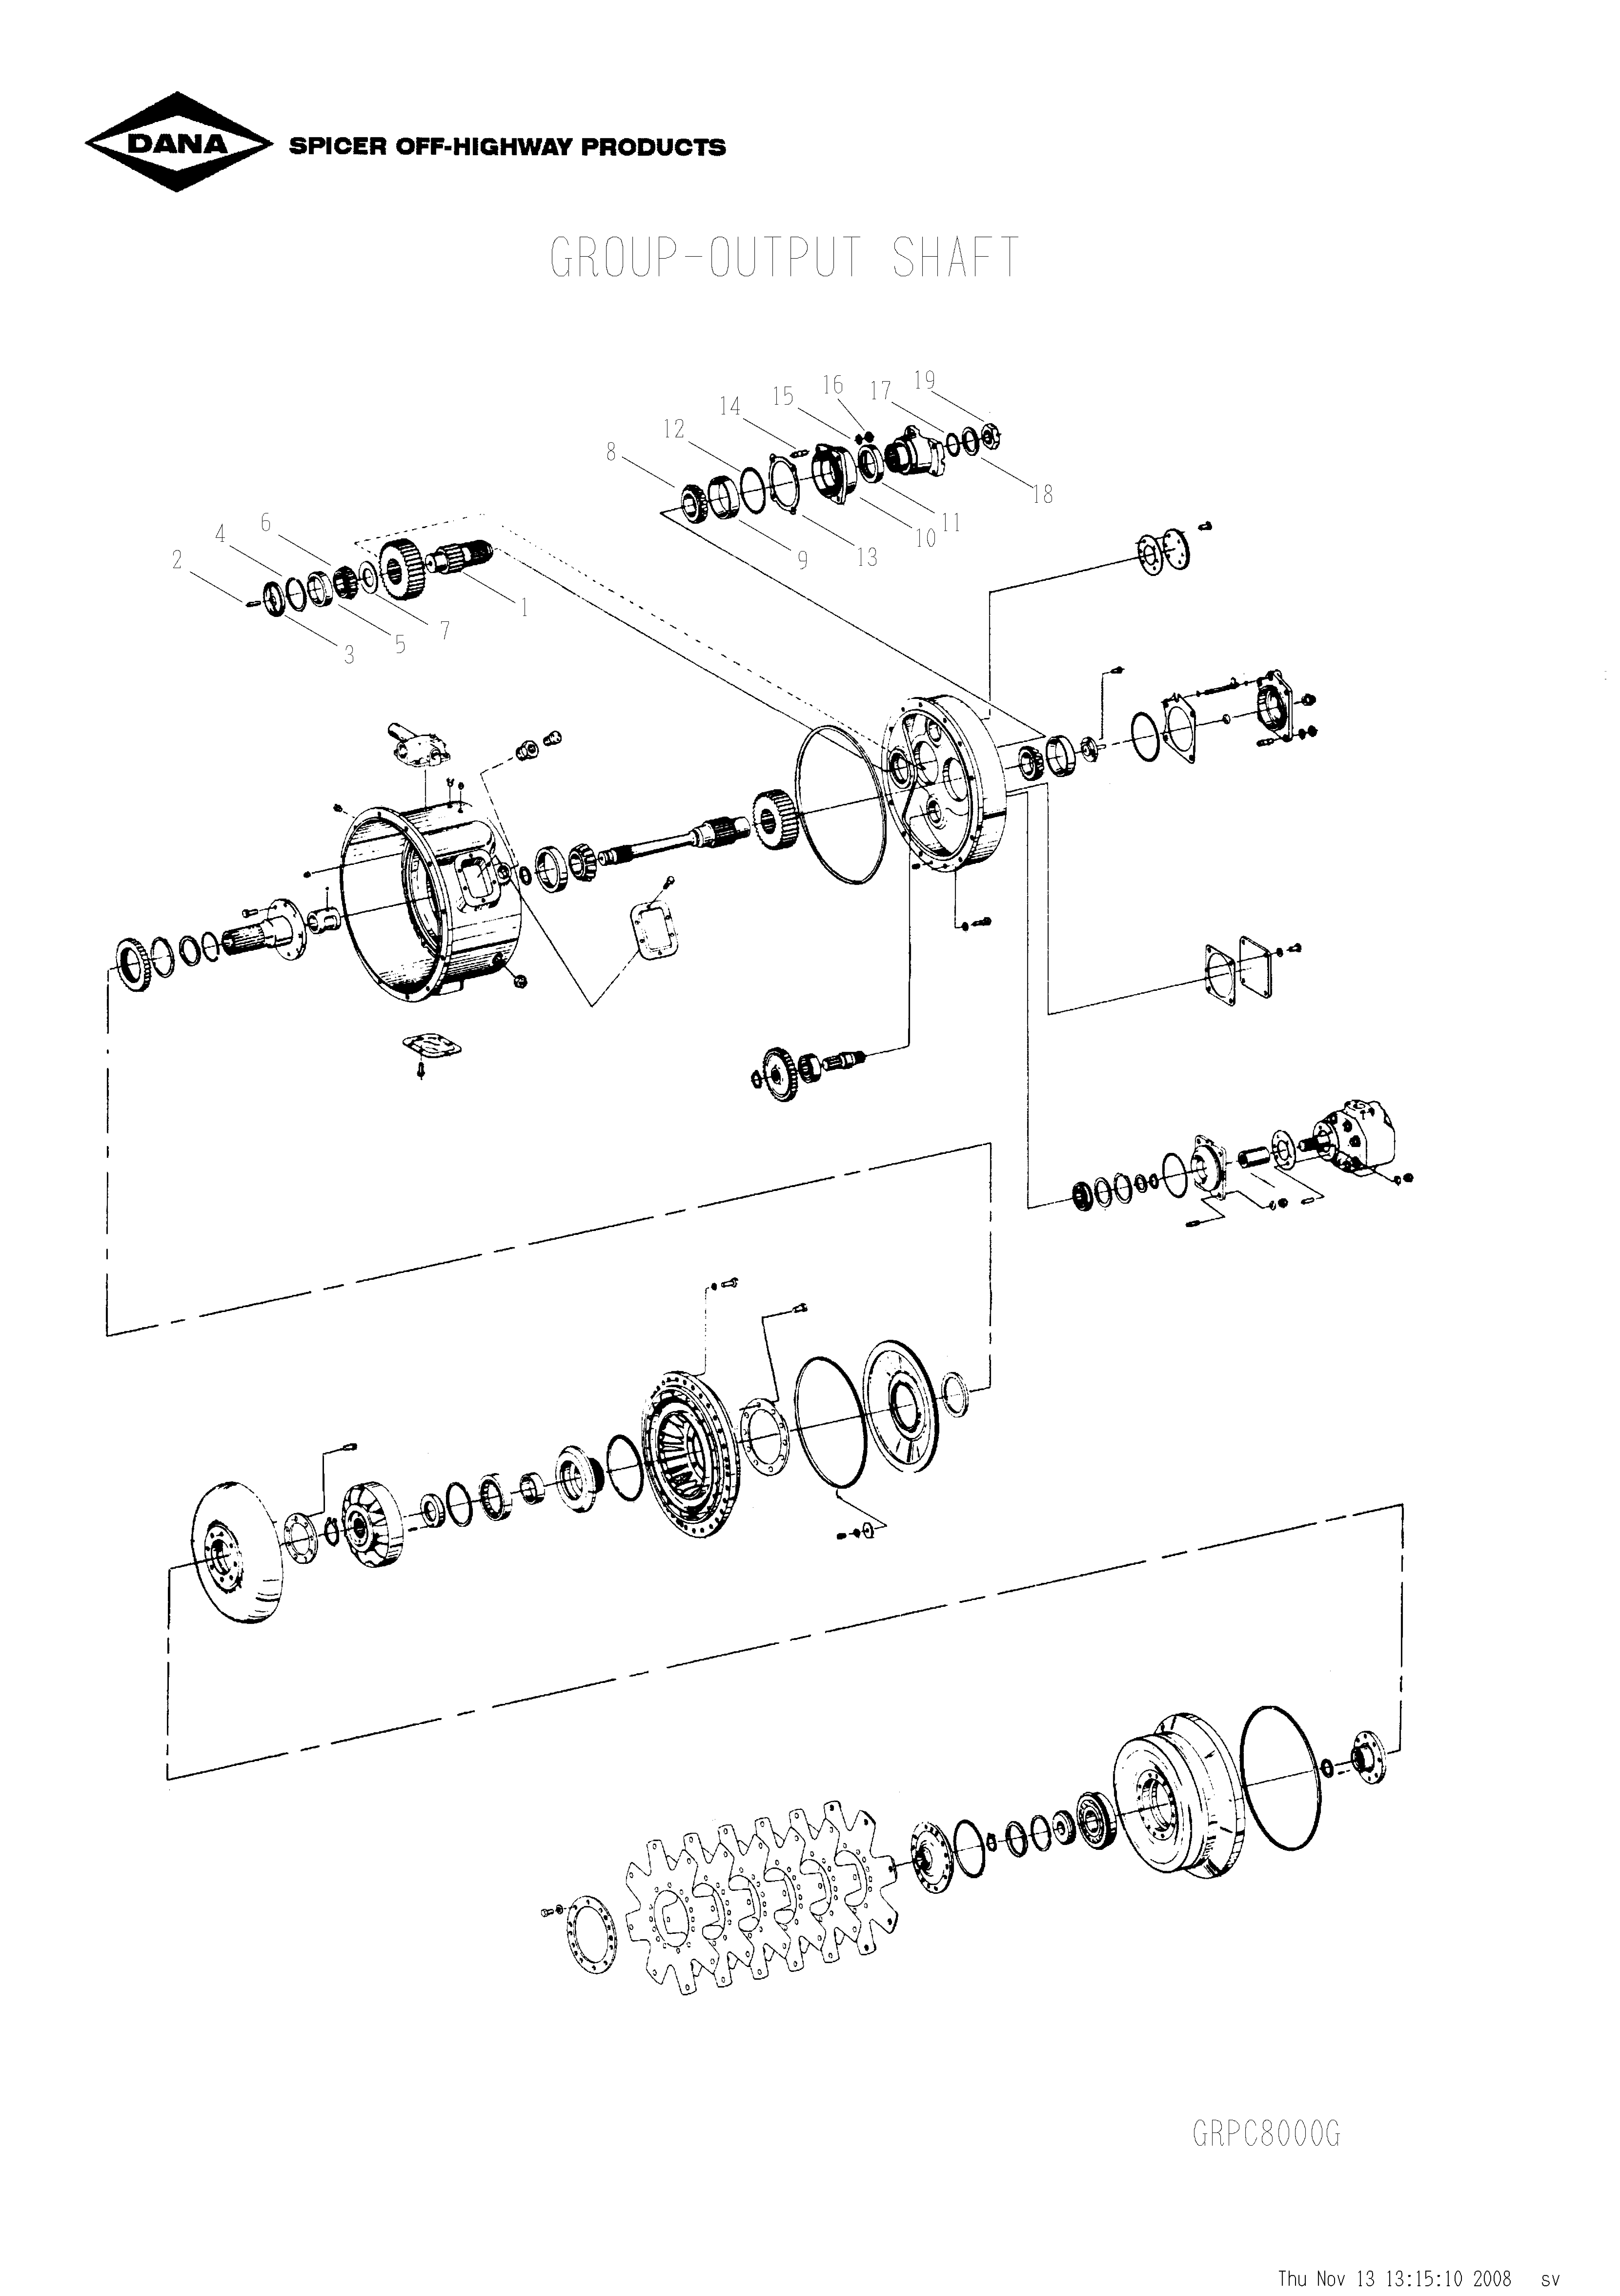 drawing for MILLER TECHNOLOGY 0011410 - CONE-BEARING (figure 1)